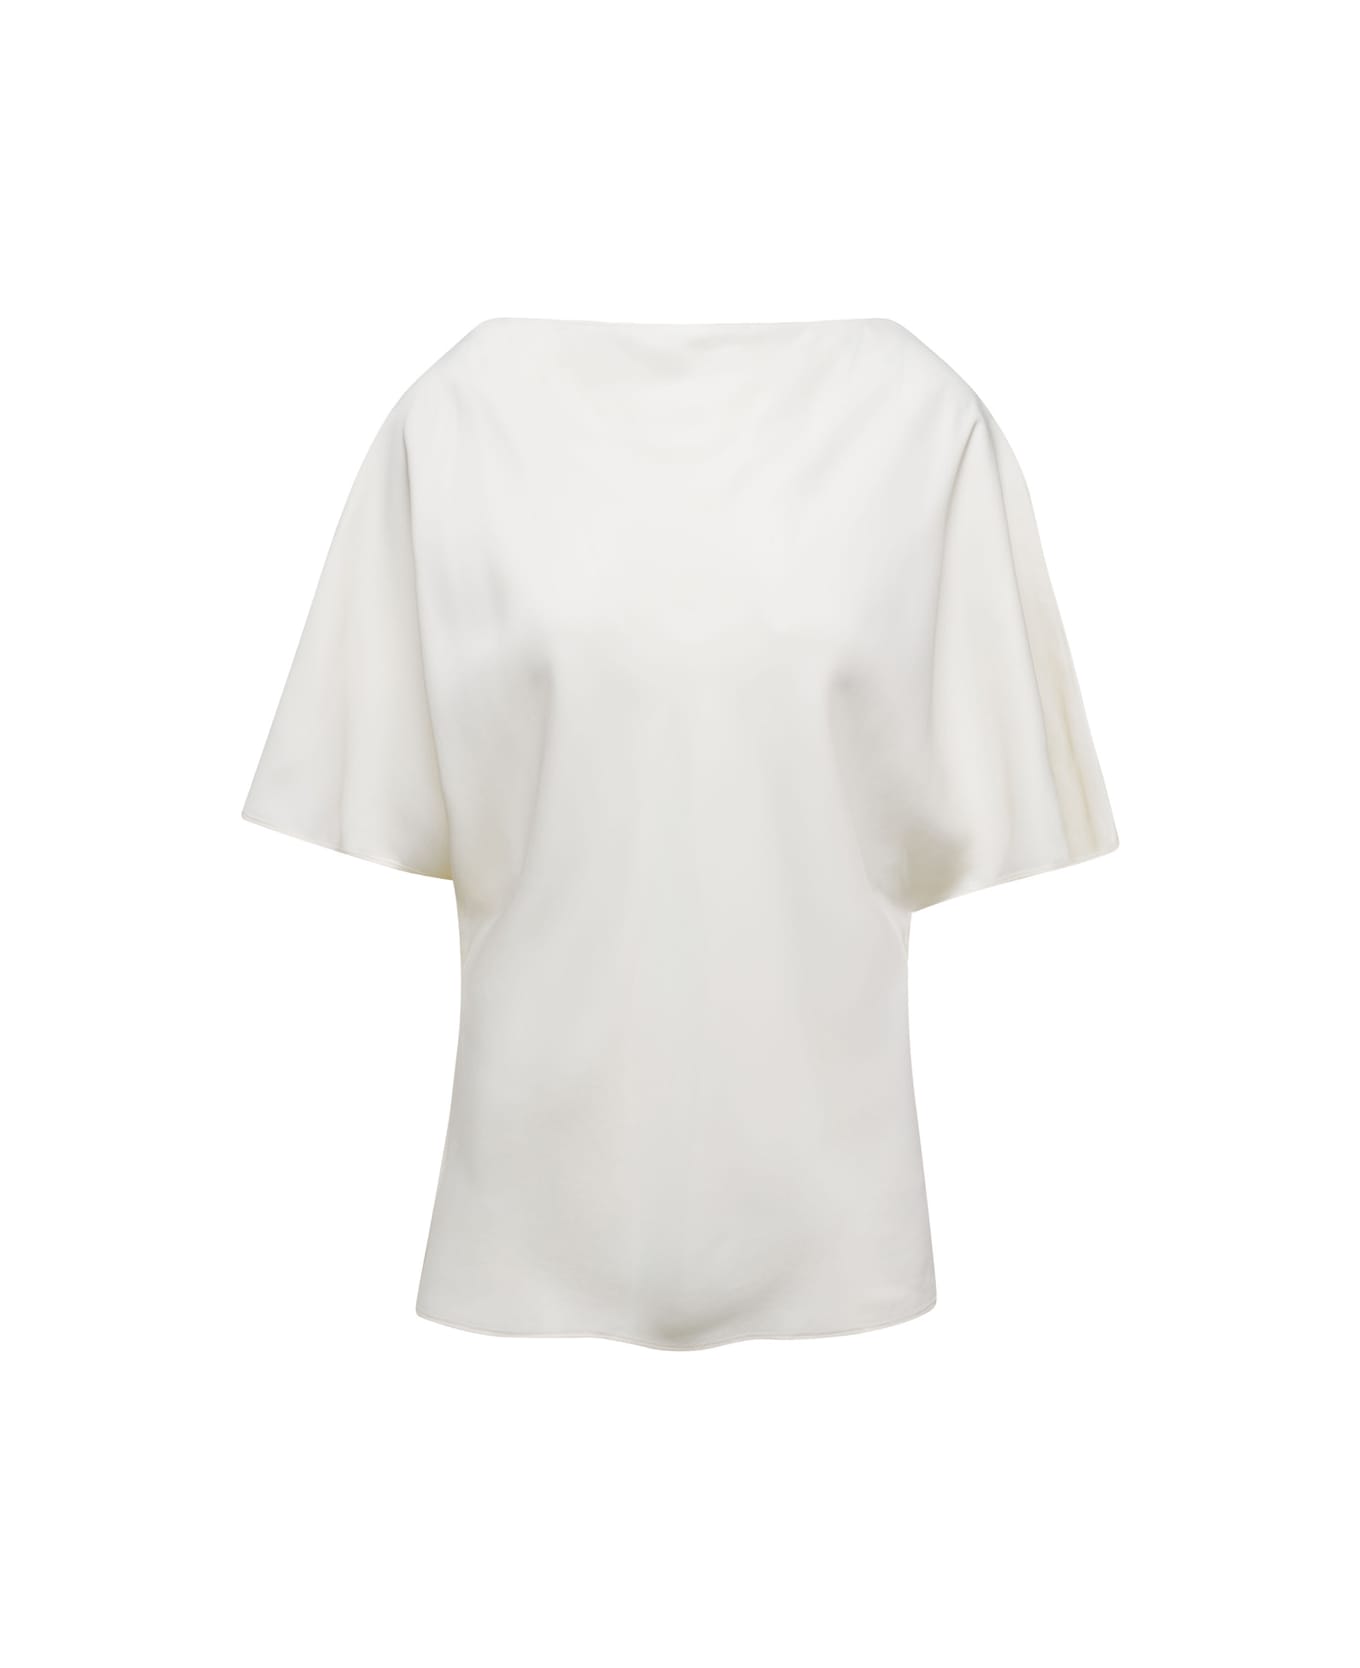 Róhe White Shirt With Boat Neckline In Viscose Woman - White シャツ